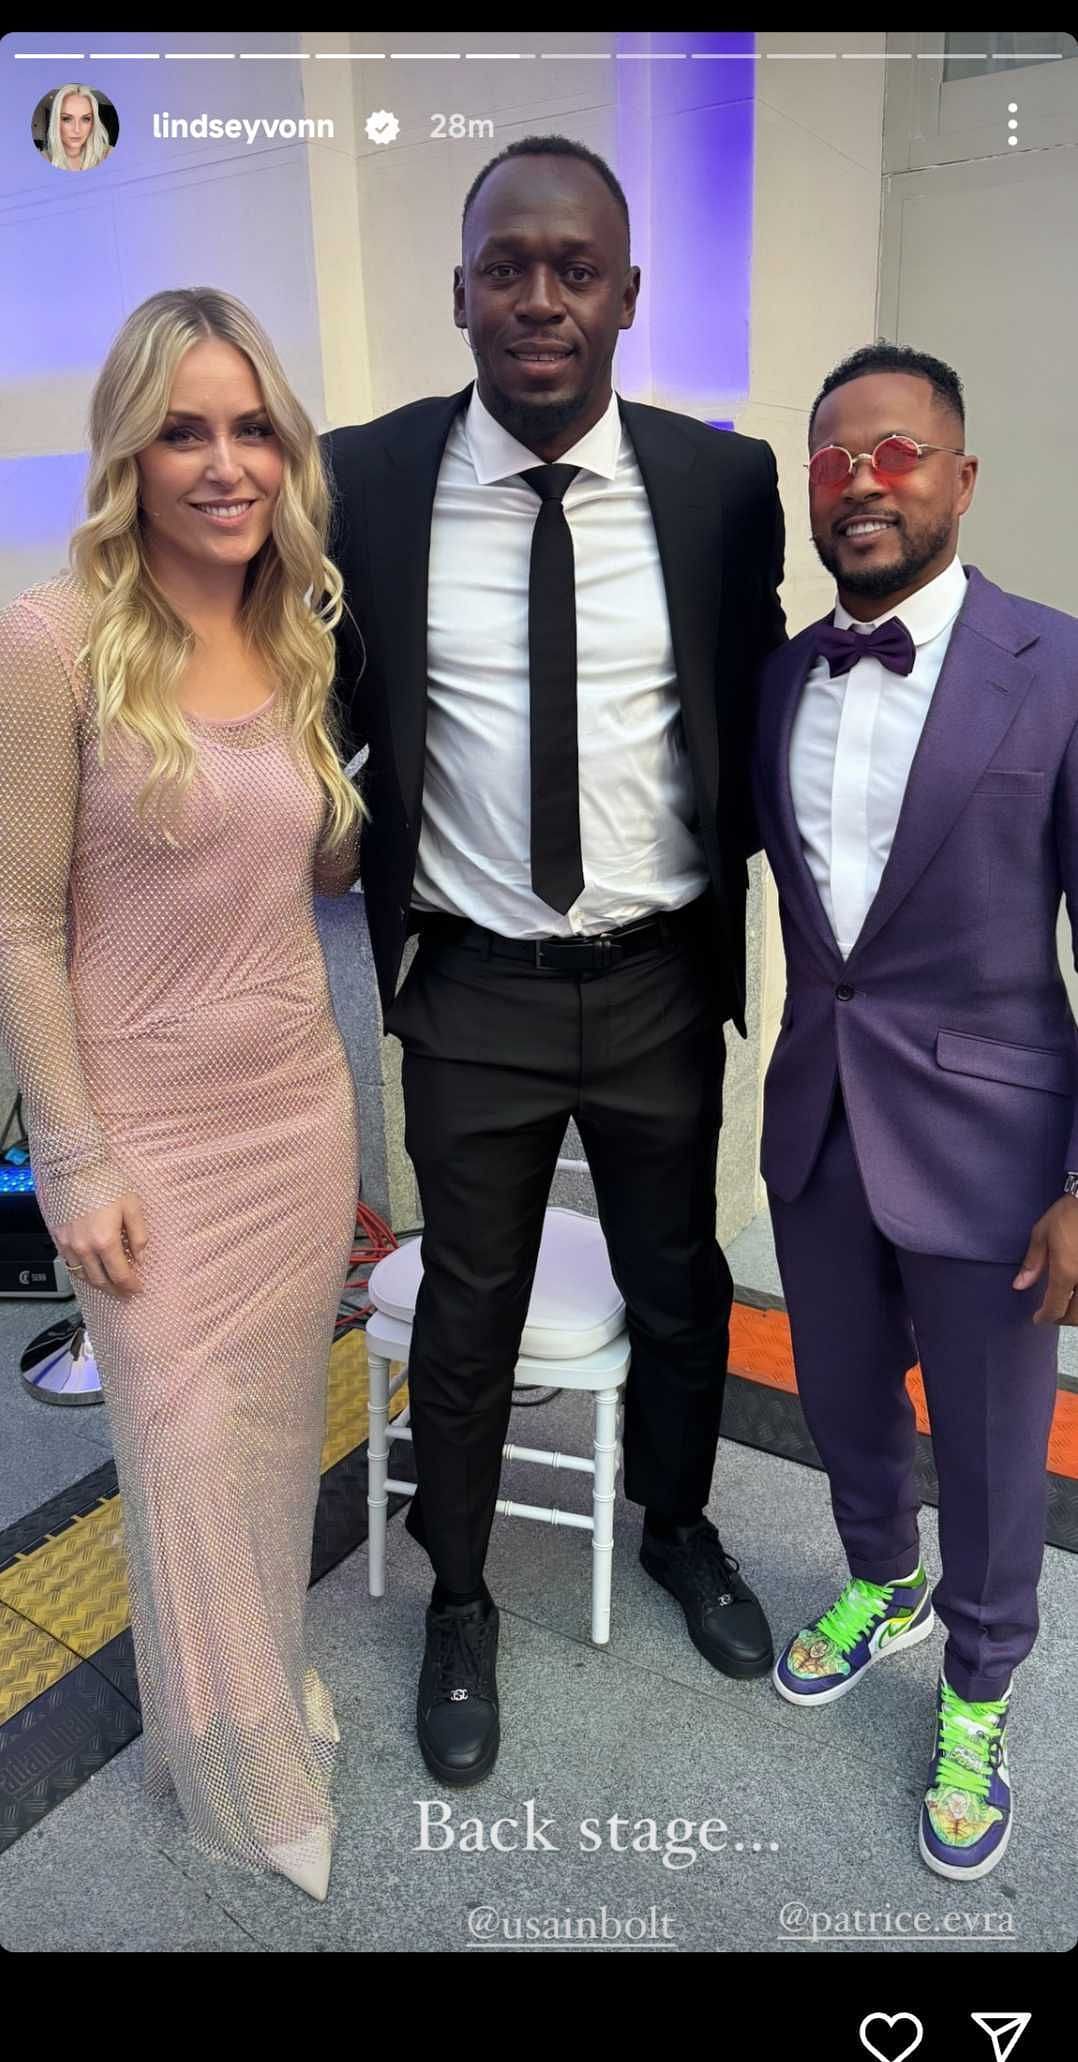 Lindsey Vonn, Usain Bolt and Patrice Evra (from left)